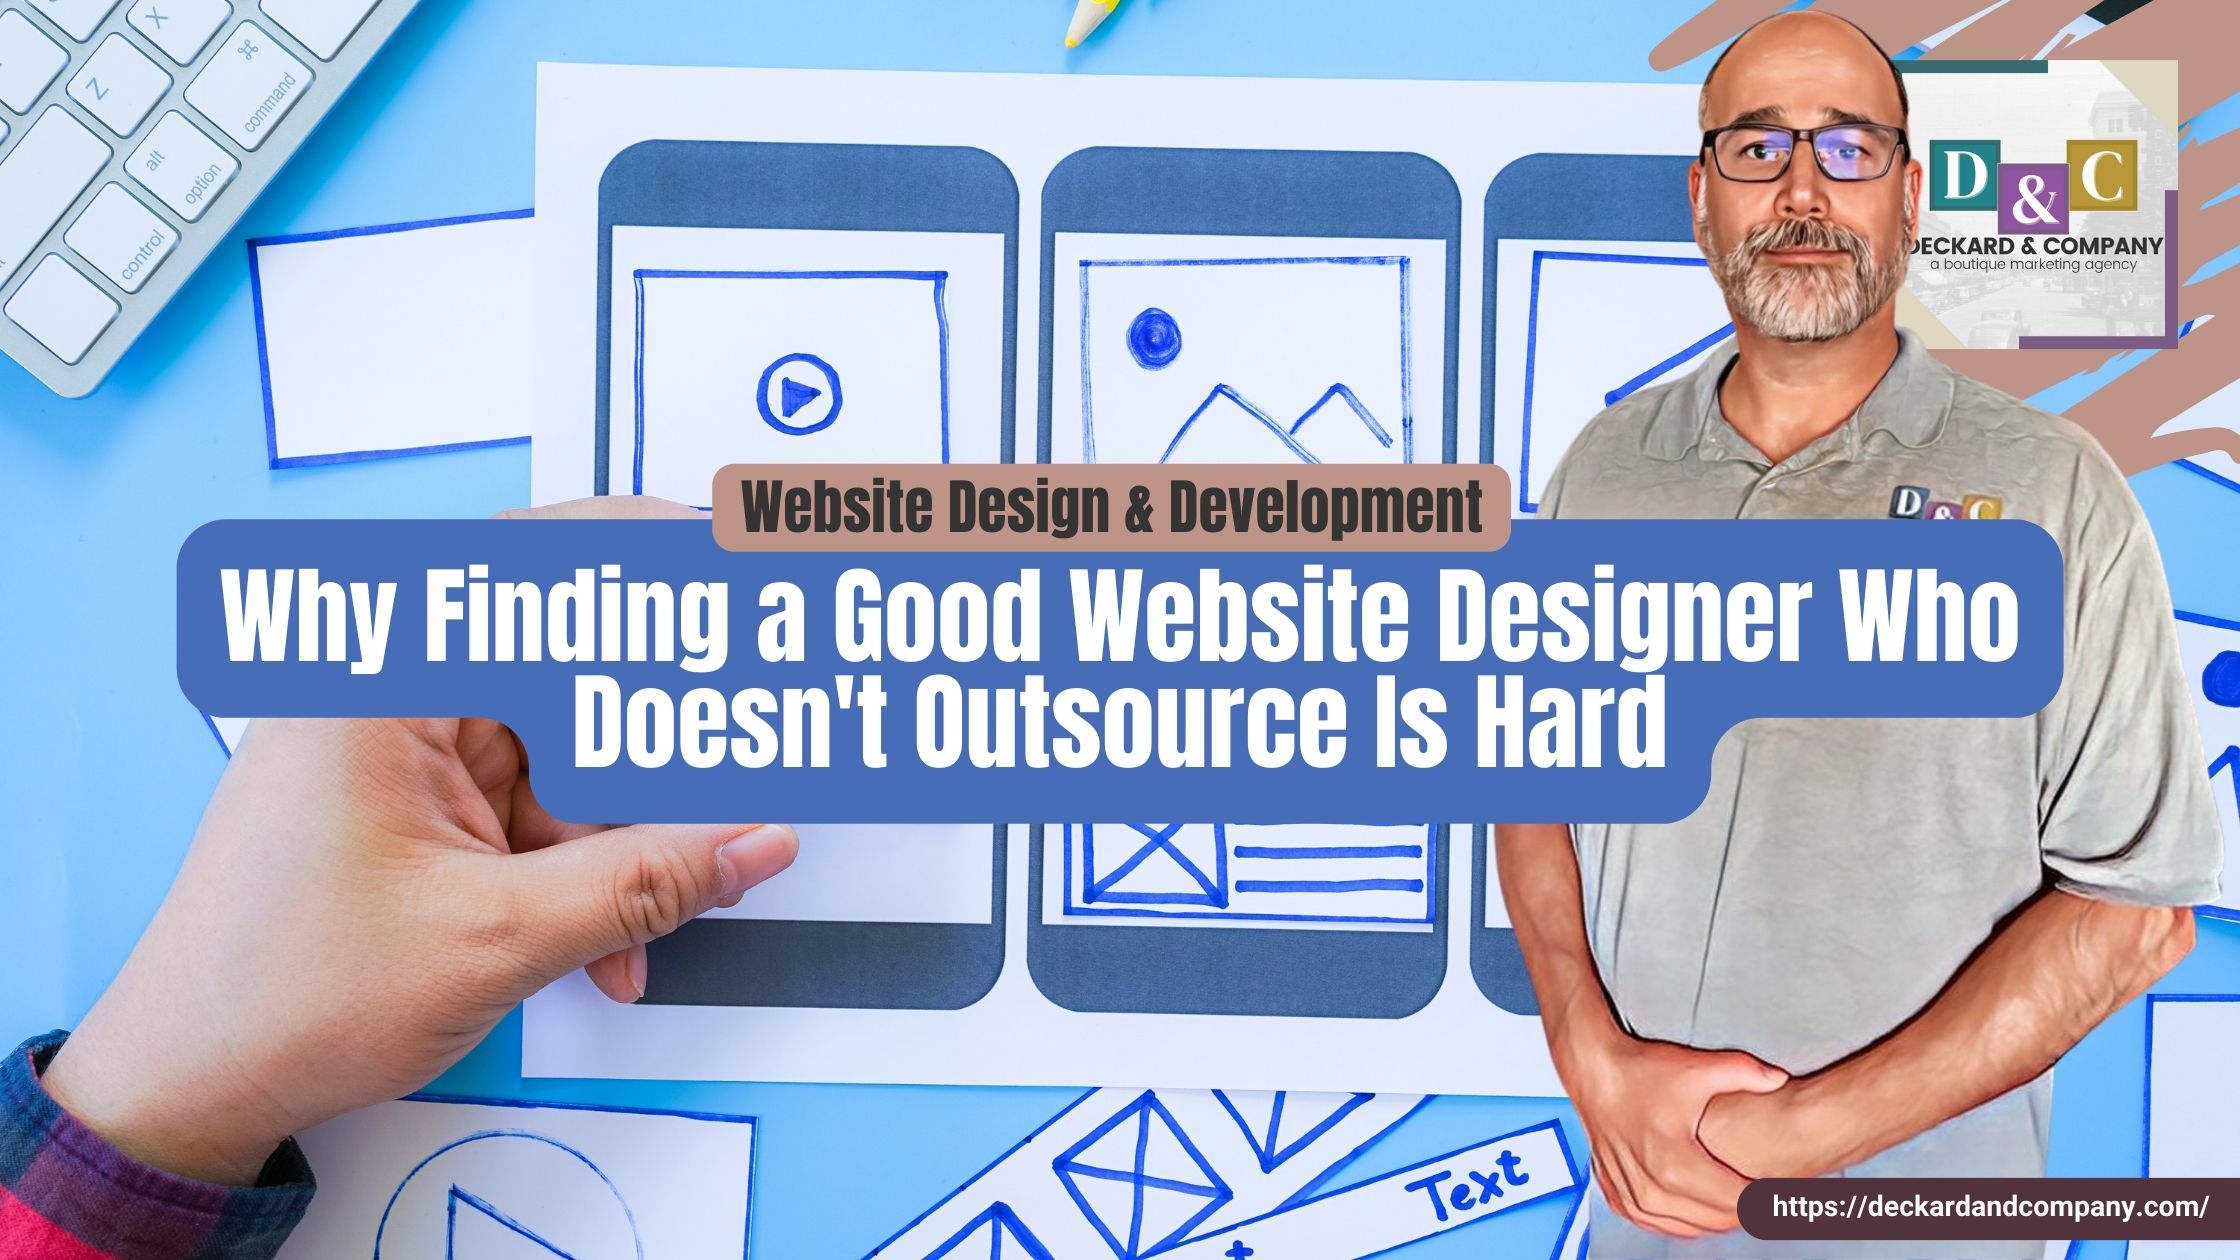 Why Finding a Good Website Designer Who Doesn't Outsource Is Hard but worth it. Deckard & Company is a No-Outsourcing WordPress website design agency in the Sarasota/Bradenton area of Florida.